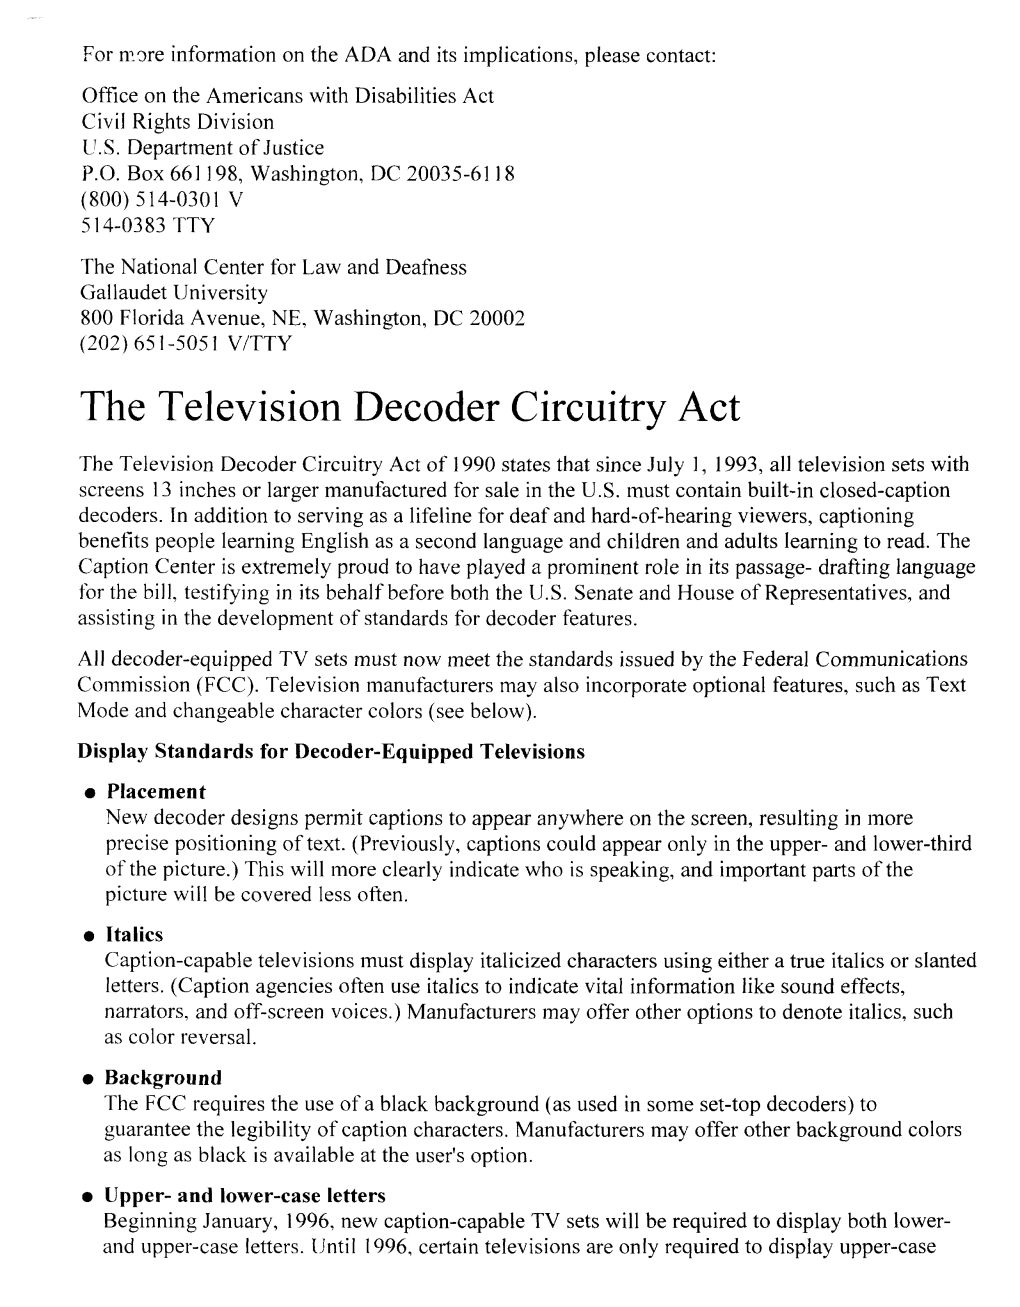 The Television Decoder Circuitry Act